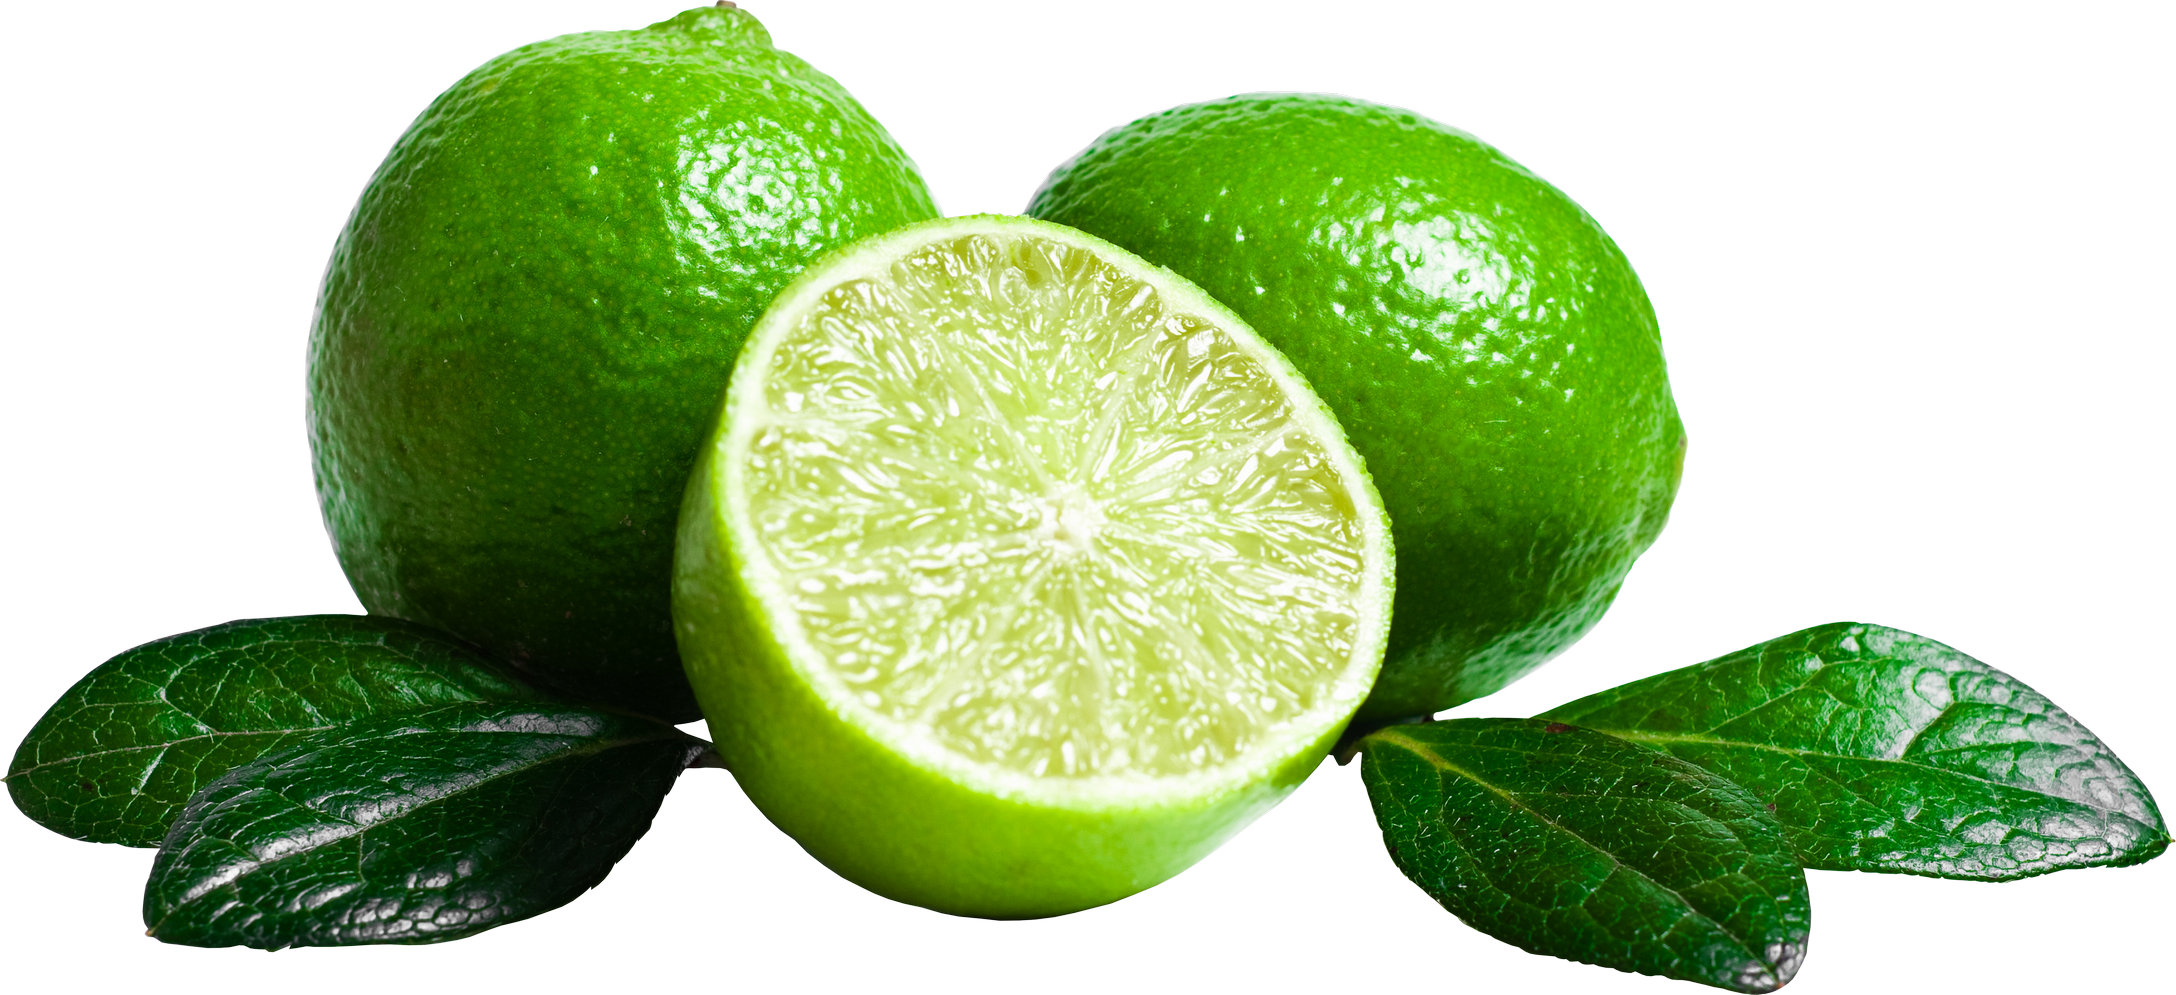 A Limes And A Half Cut Lime